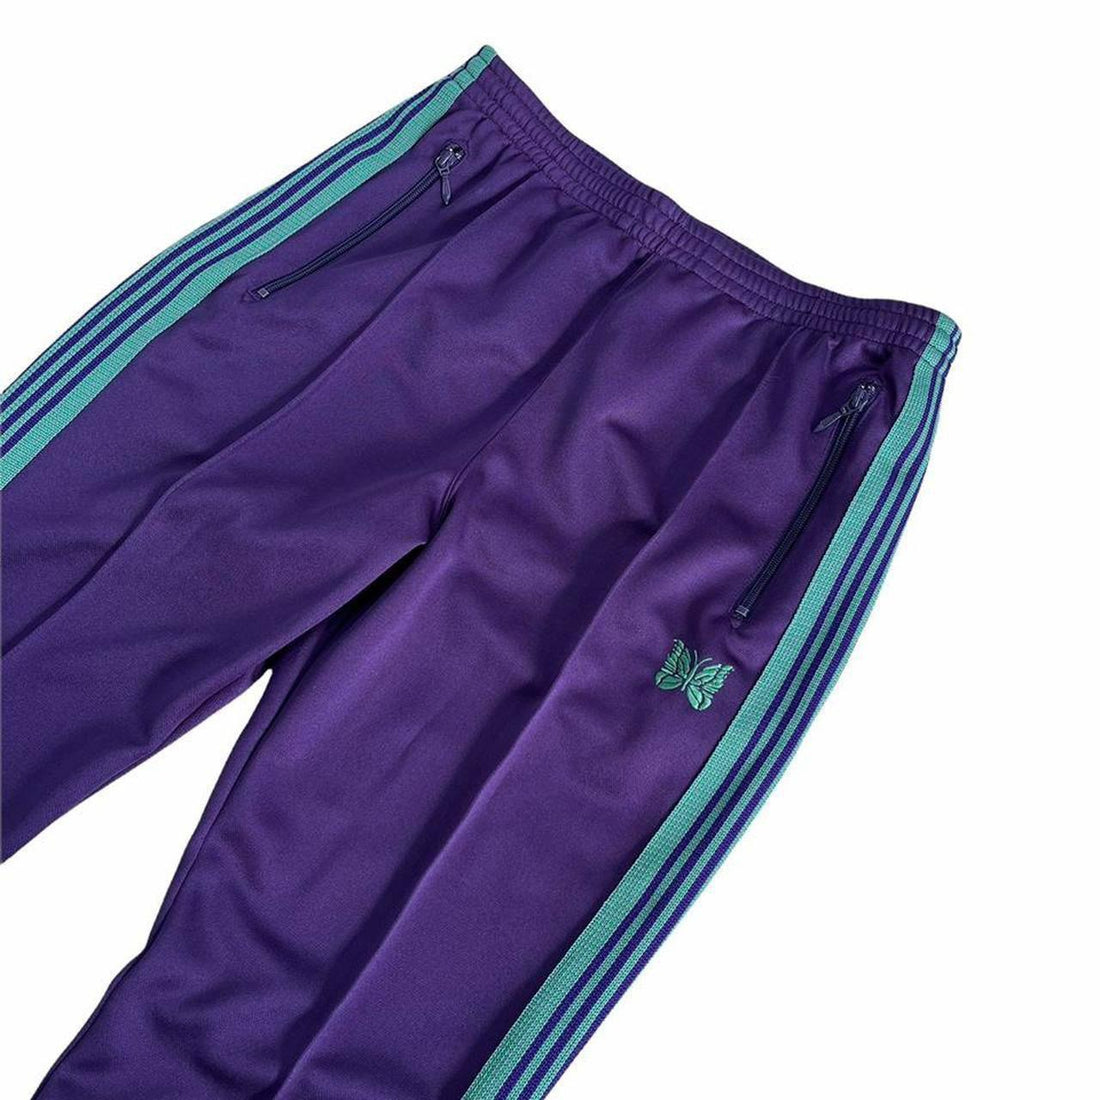 Needles Nepenthes and purple track pants